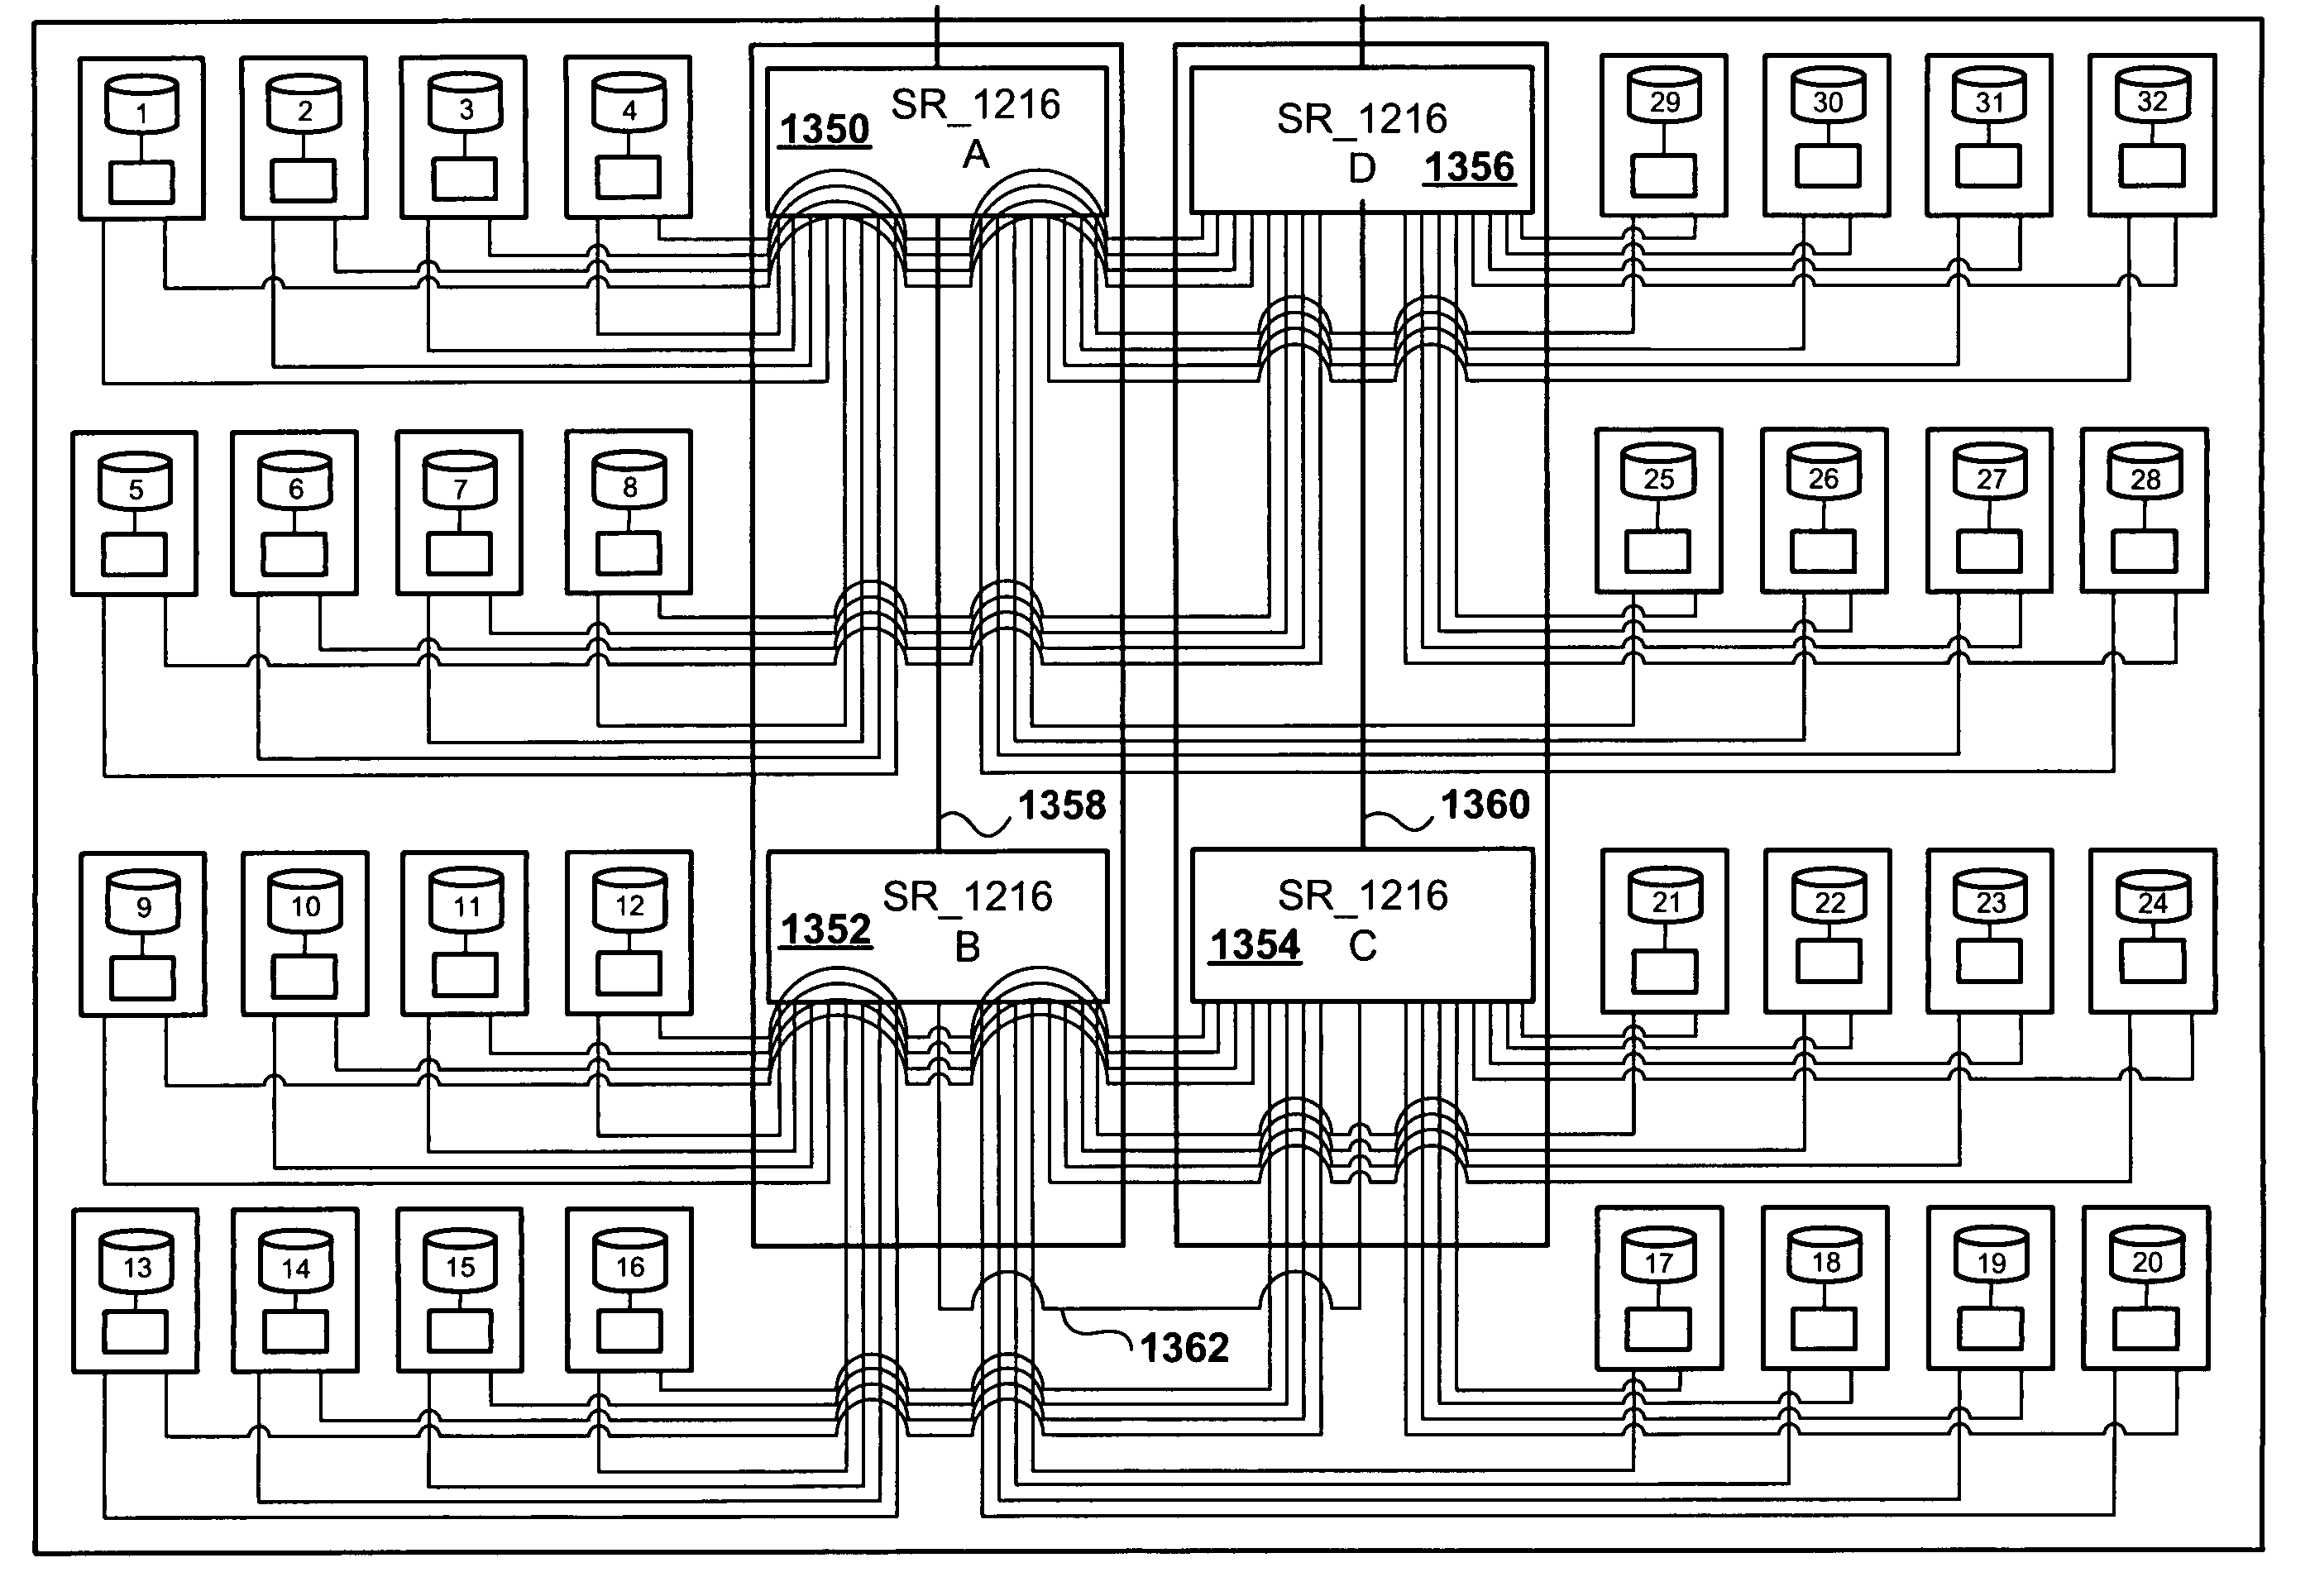 Integrated-circuit implementation of a storage-shelf router and a path controller card for combined use in high-availability mass-storage-device shelves that may be incorporated within disk arrays